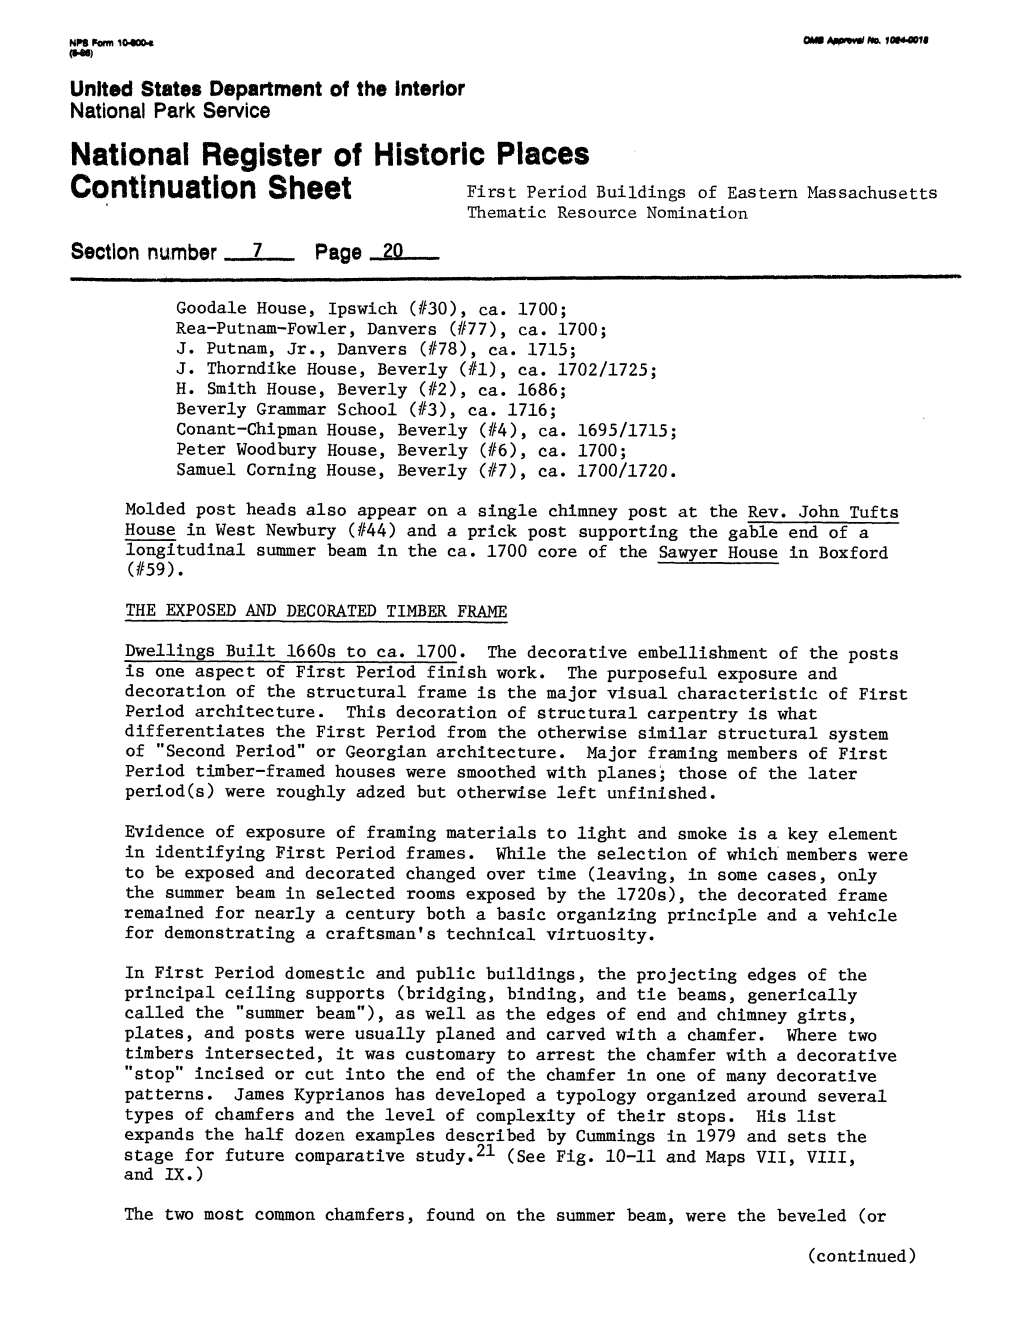 National Register of Historic Places Continuation Sheet First Period Buildings of Eastern Massachusetts Thematic Resource Nomination Section Number 7 Page 20